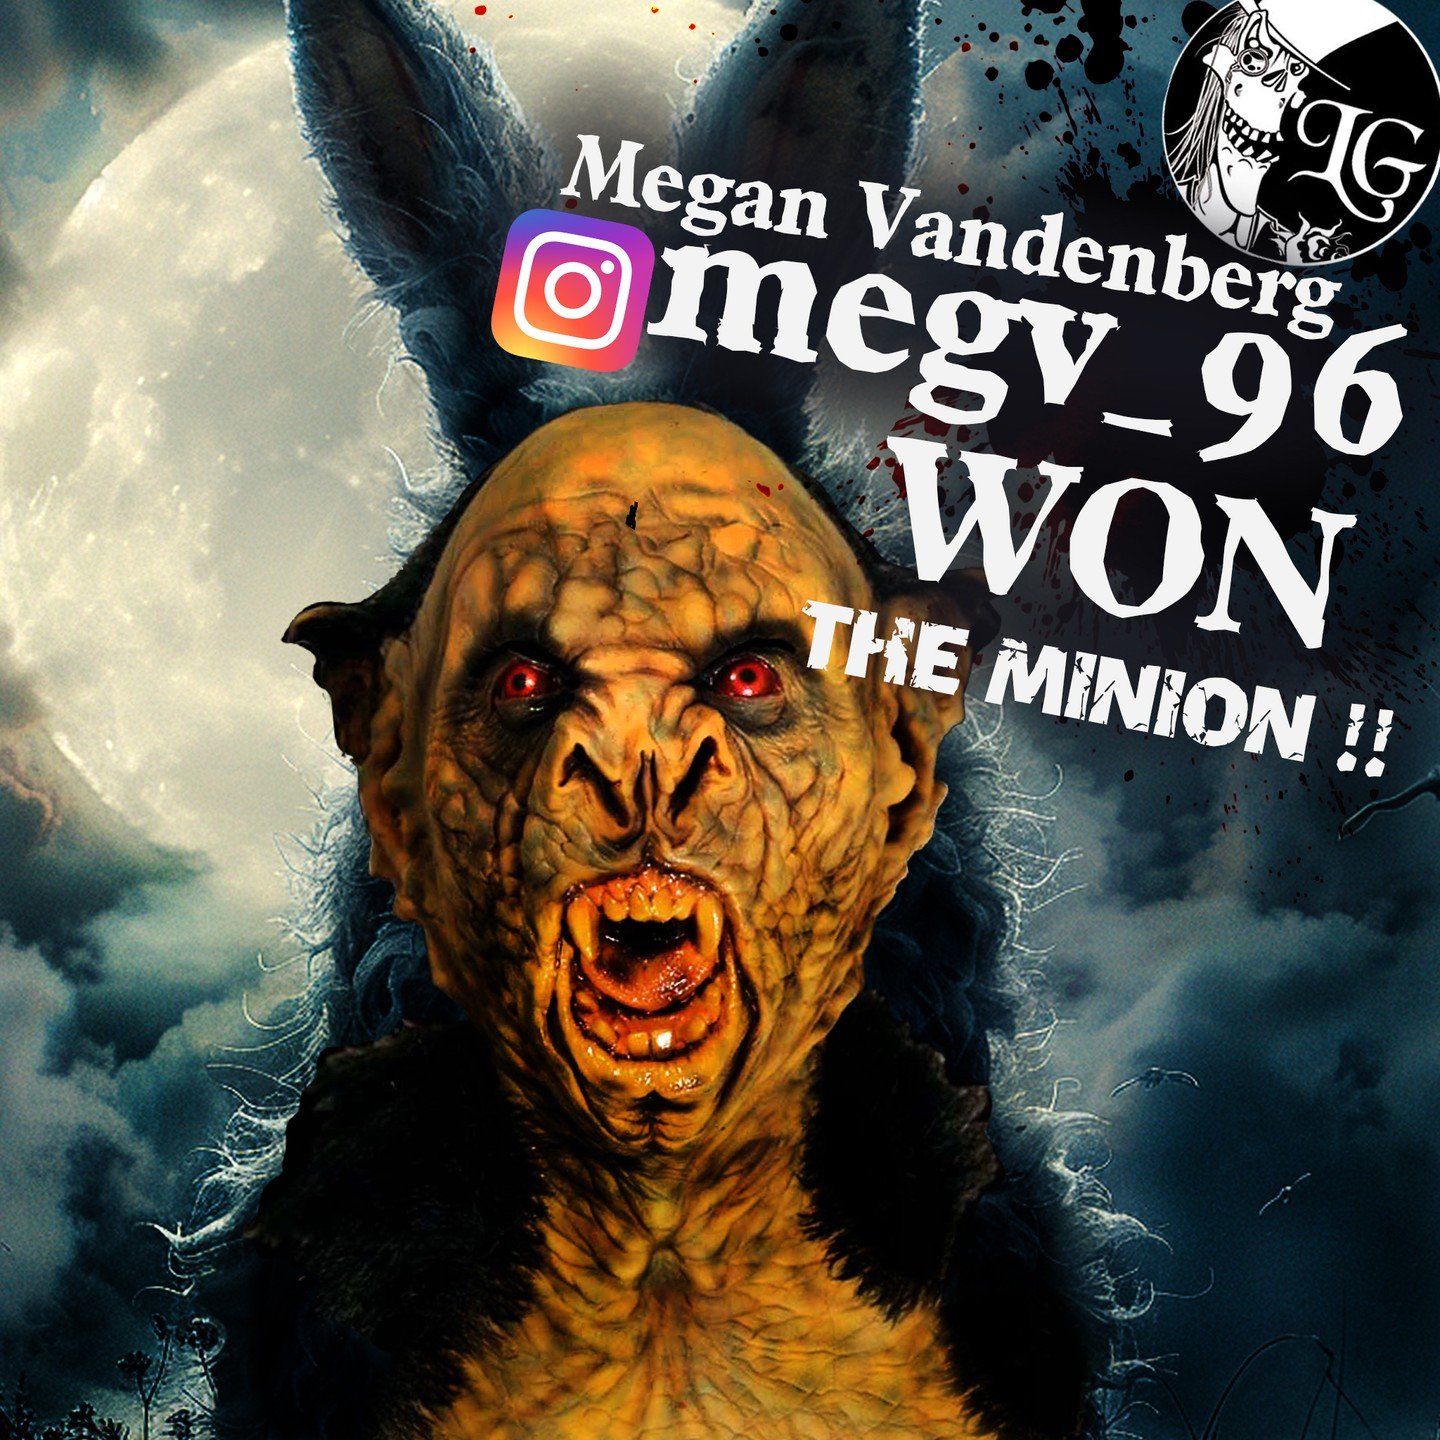 megv_96 @megv_96 has Won the Minion !!

The manor thanks you all for playing. Let's do this again in a few months, shall we ?! 😈😈😈

megv_96 if you could please DM your local minion we would appreciate a shipping address.

Find us on E-Bay and Inst